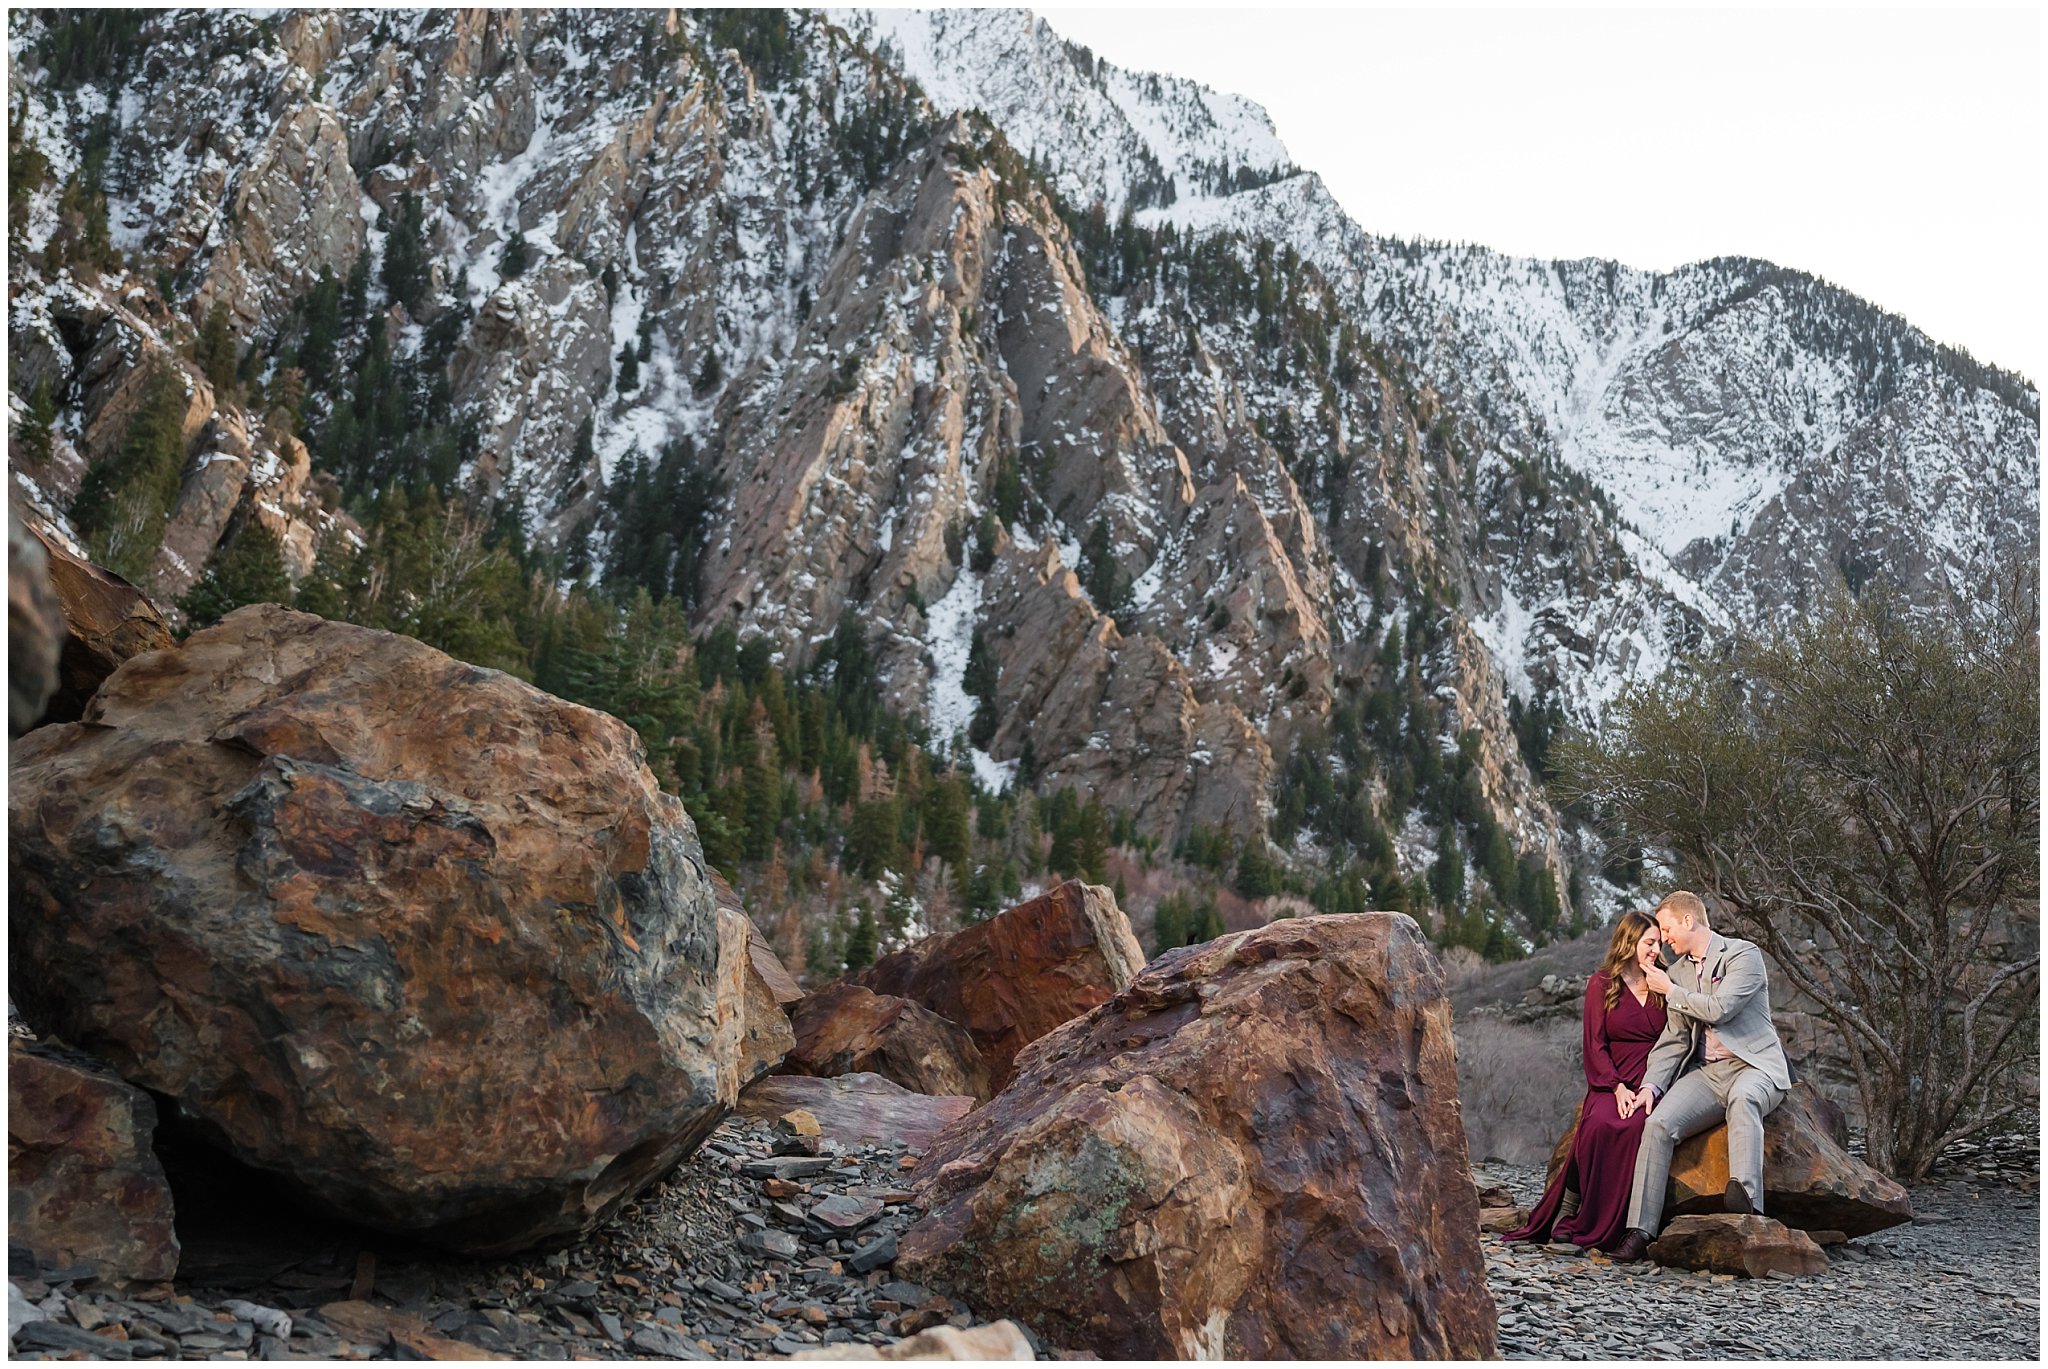 Couple dressed up in formal outfits sharing candid moments in the Utah mountains in the snow | Big Cottonwood Canyon Winter Engagement Session | Jessie and Dallin Photography